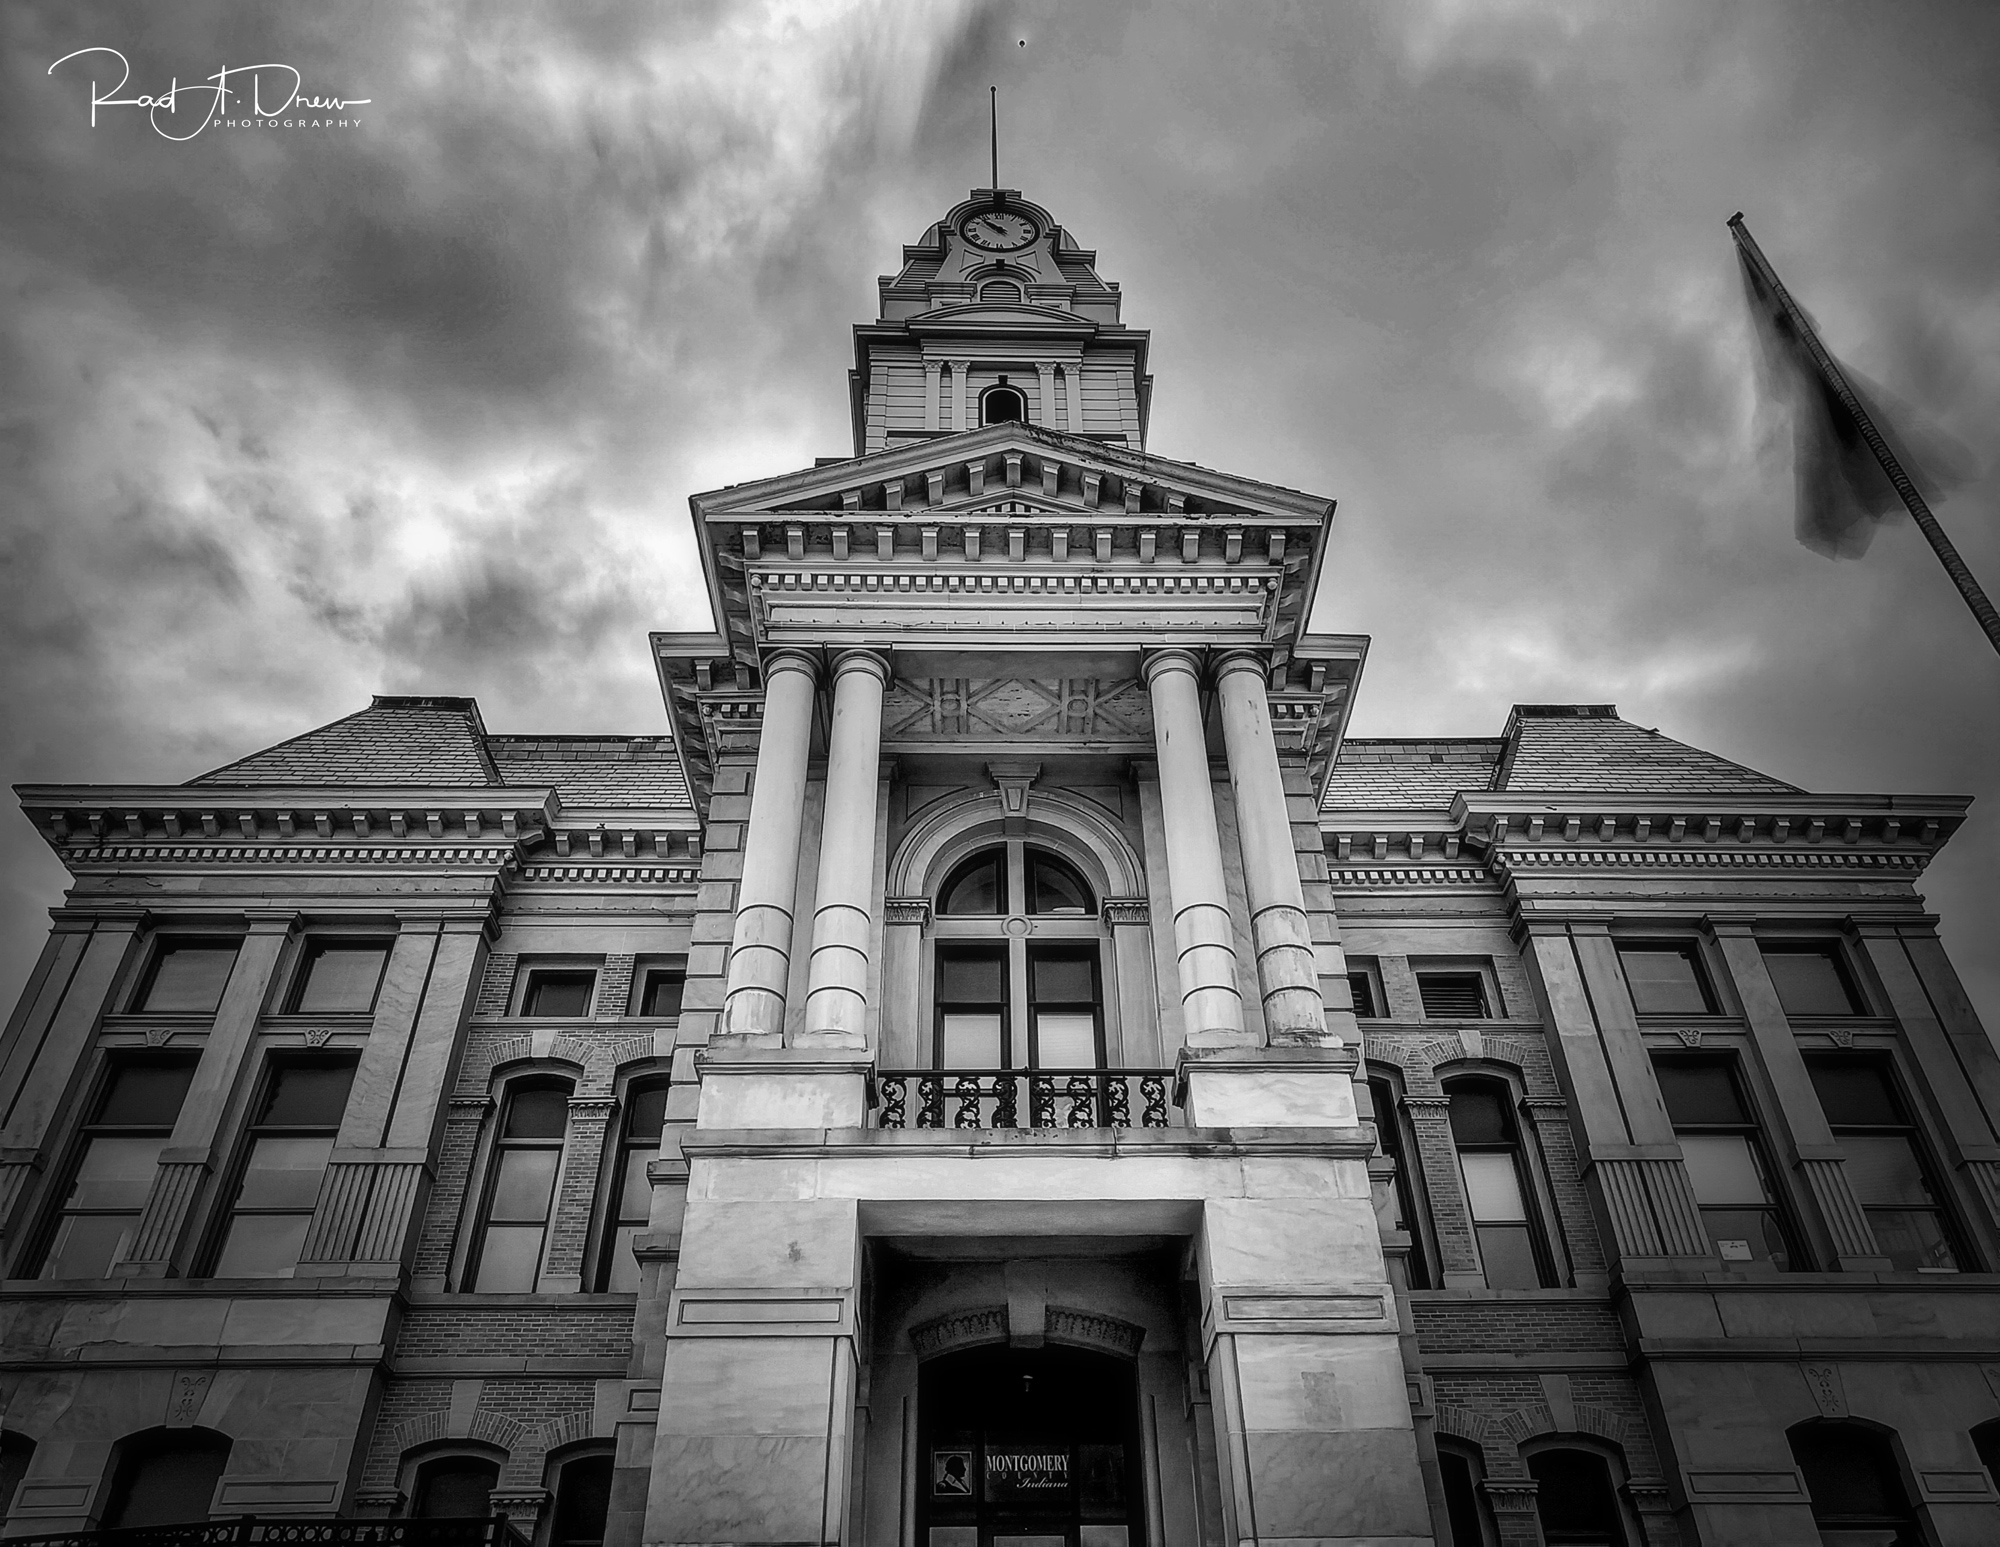 Montgomery County Courthouse, Crawfordsville, Indiana iPhone 14 Pro Max, Camera +, 30 sec exposure, 720nm infrared filter, processed in Lightroom Mobile and SnapSeed 